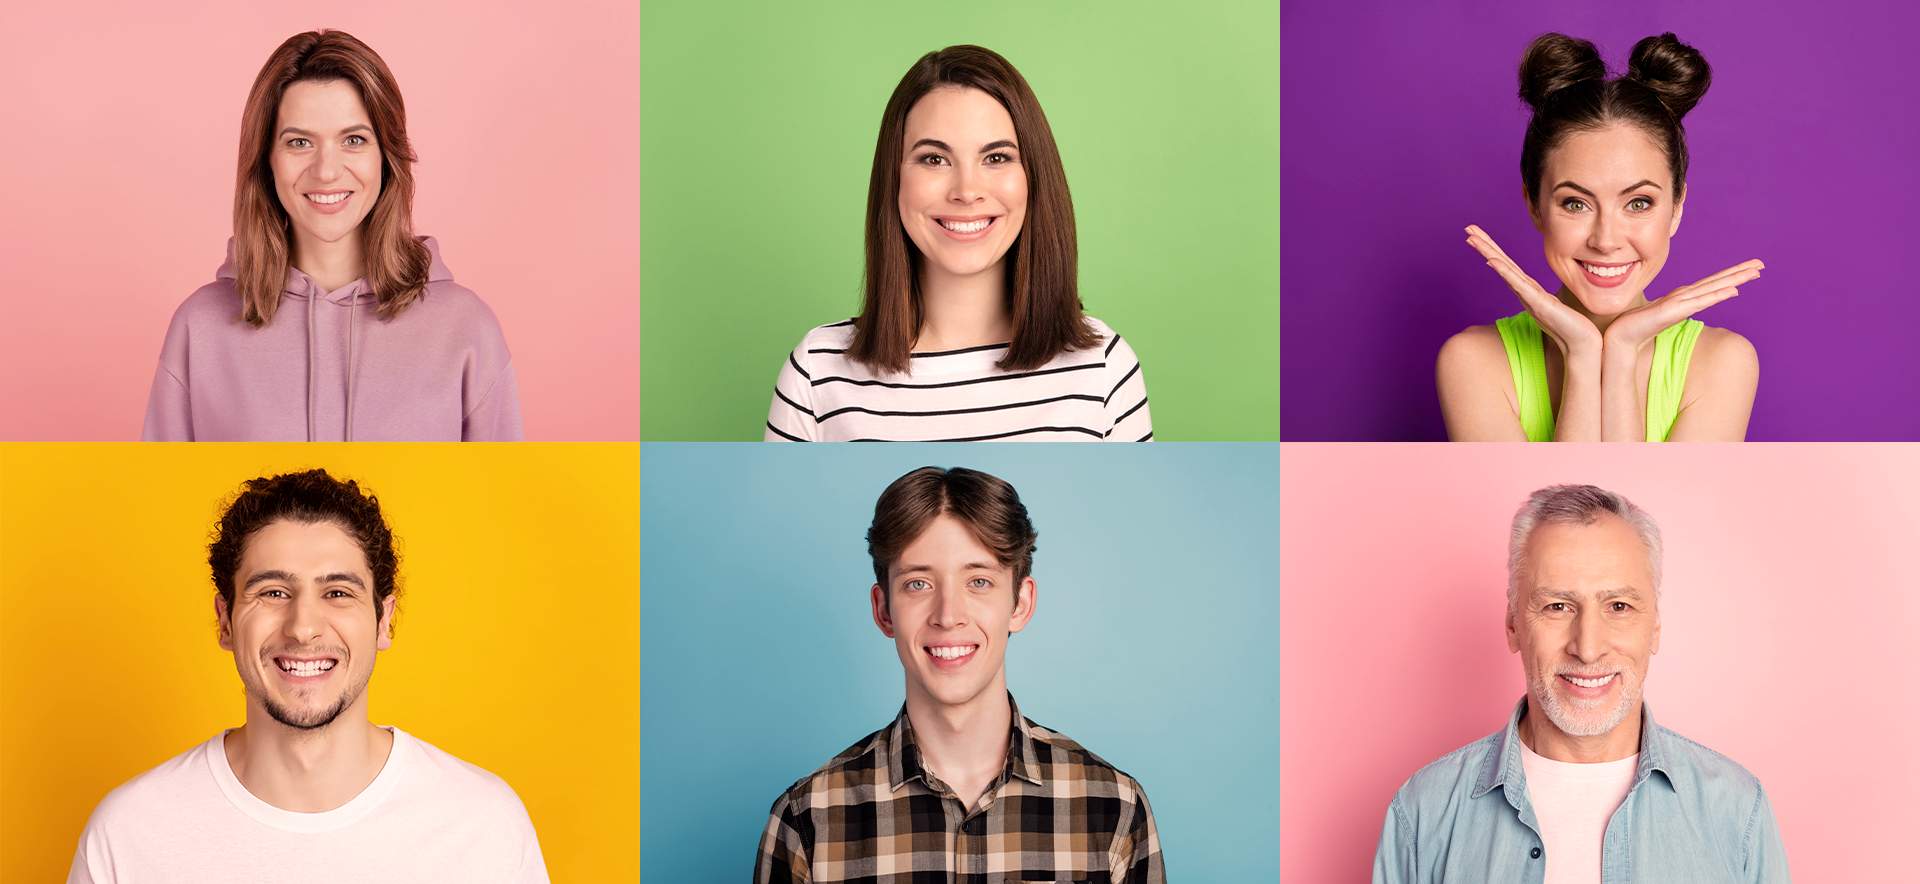 01 Montage of 3 women and 3 men smiling on flat colored backgrounds